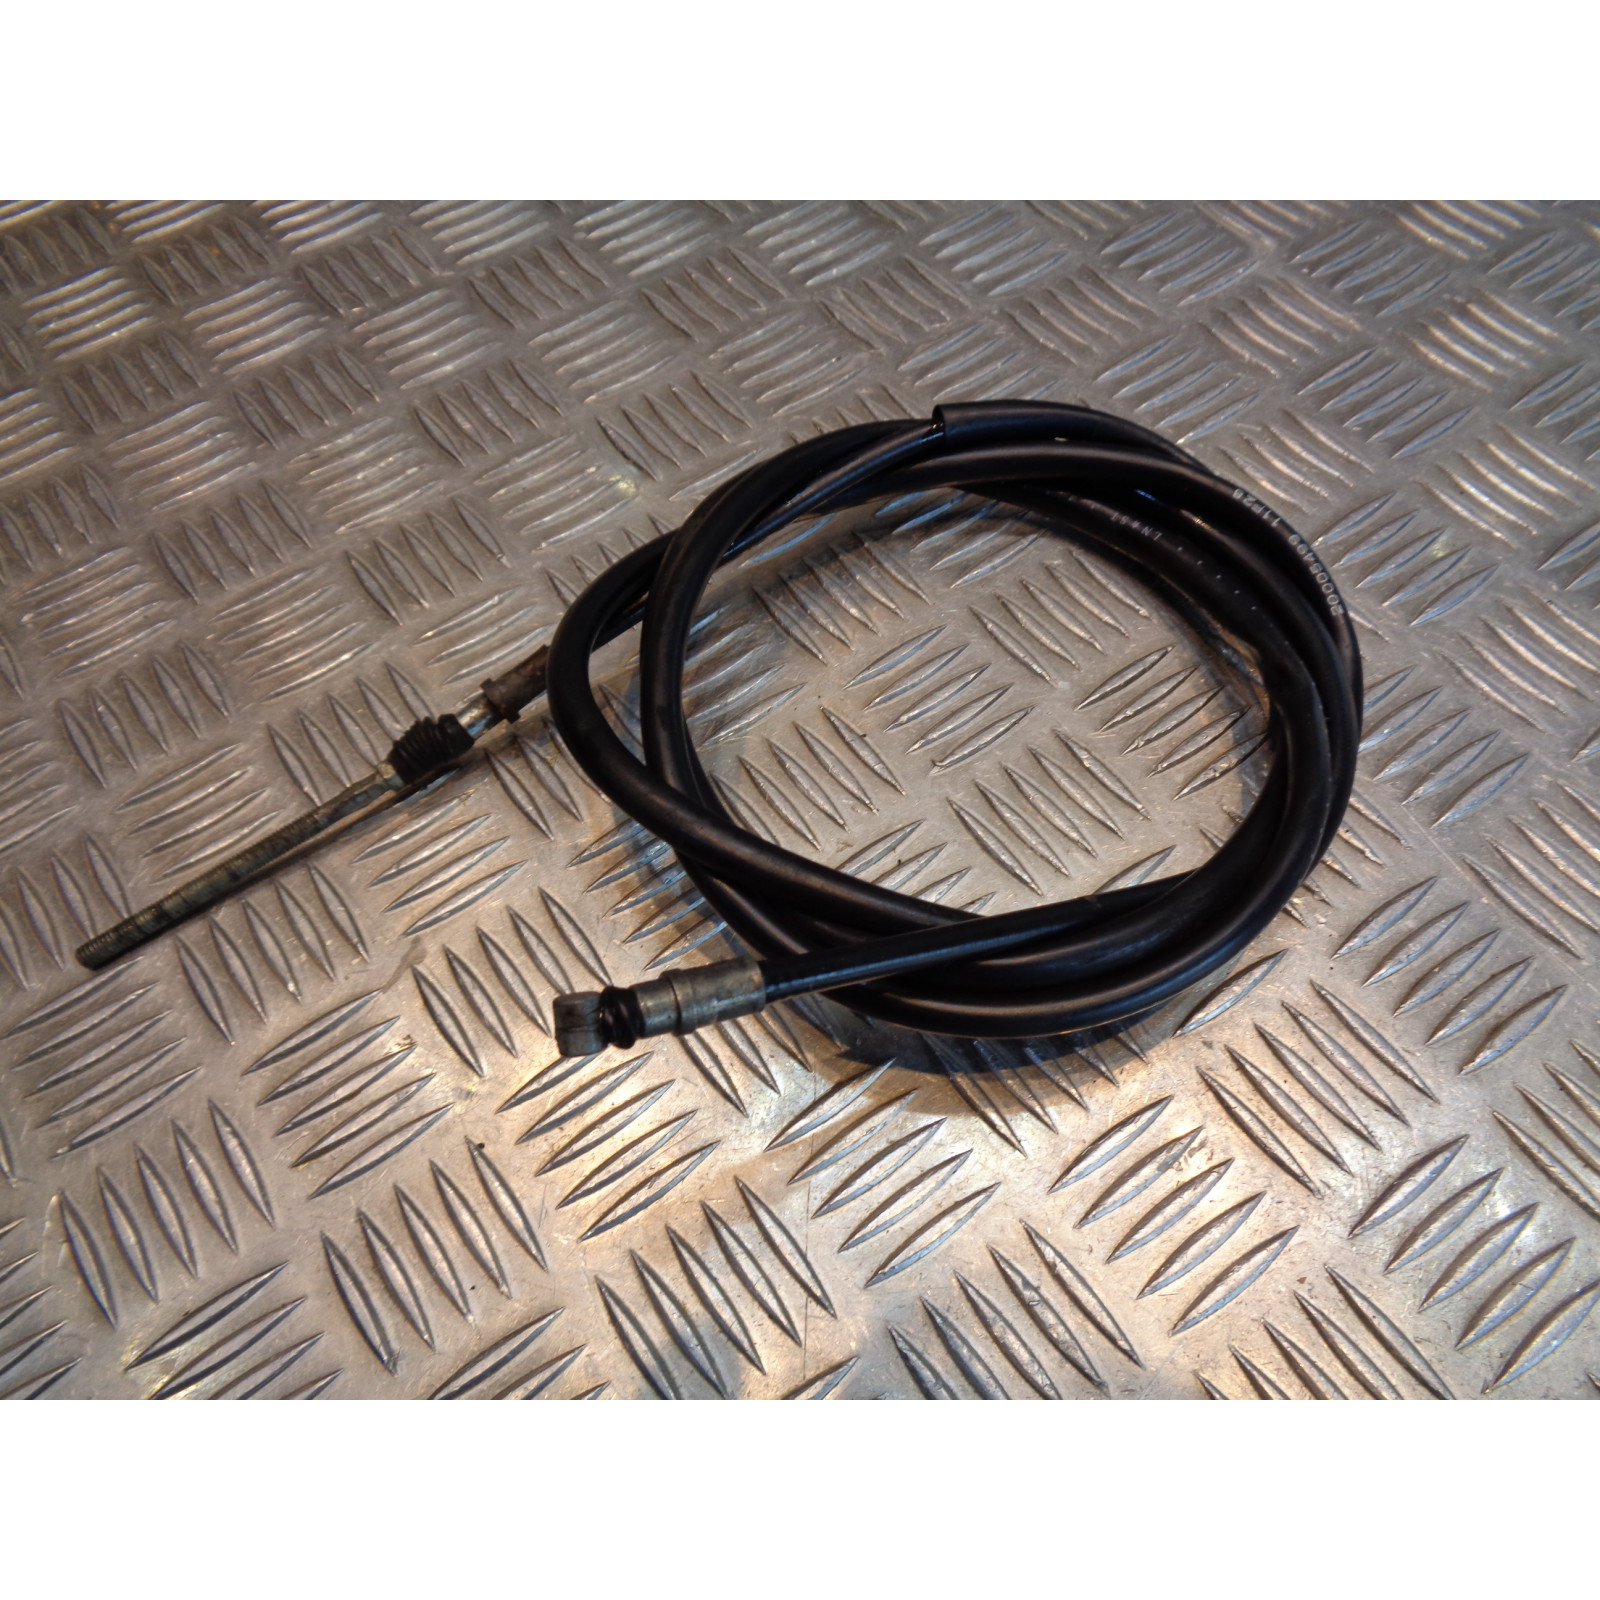 cable frein arriere scooter peugeot 50 kisbee 4 temps